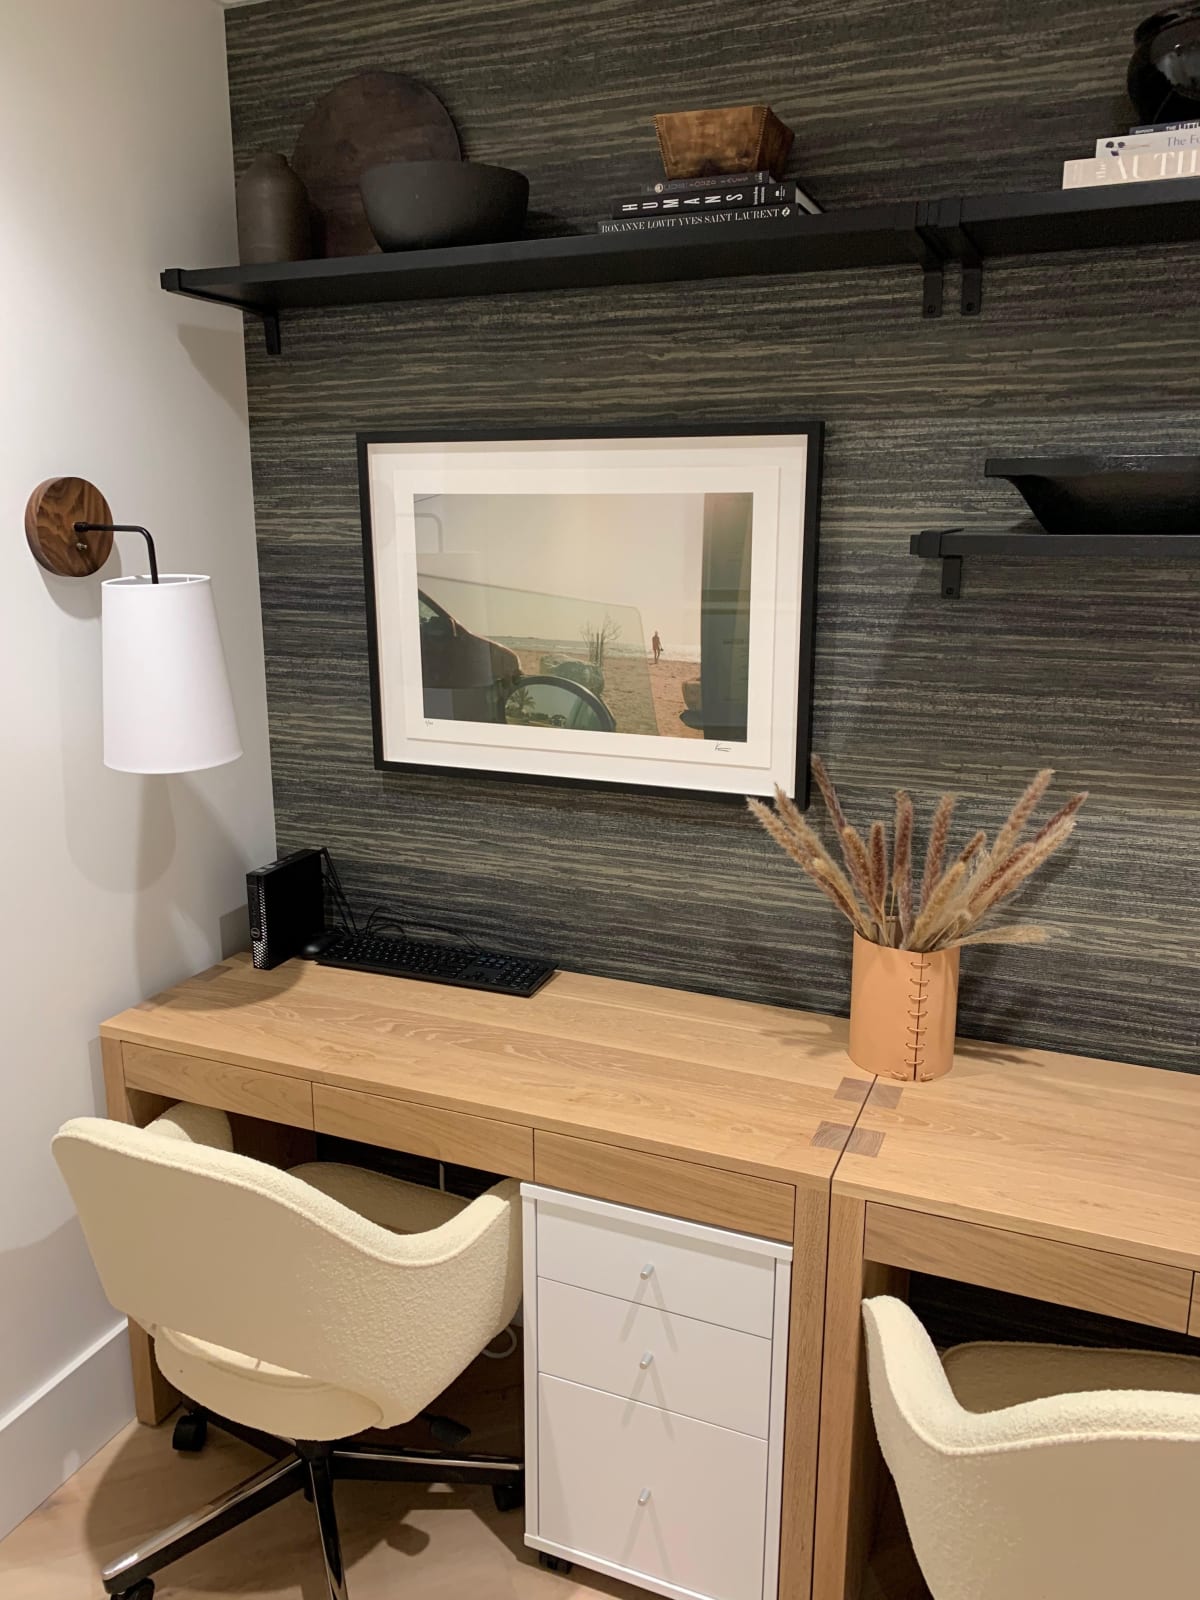 'Winter swimmer' is decorating a dentist office in California, Local Smile Co, designed by Tiffany Weiss interior design *More images to come soon